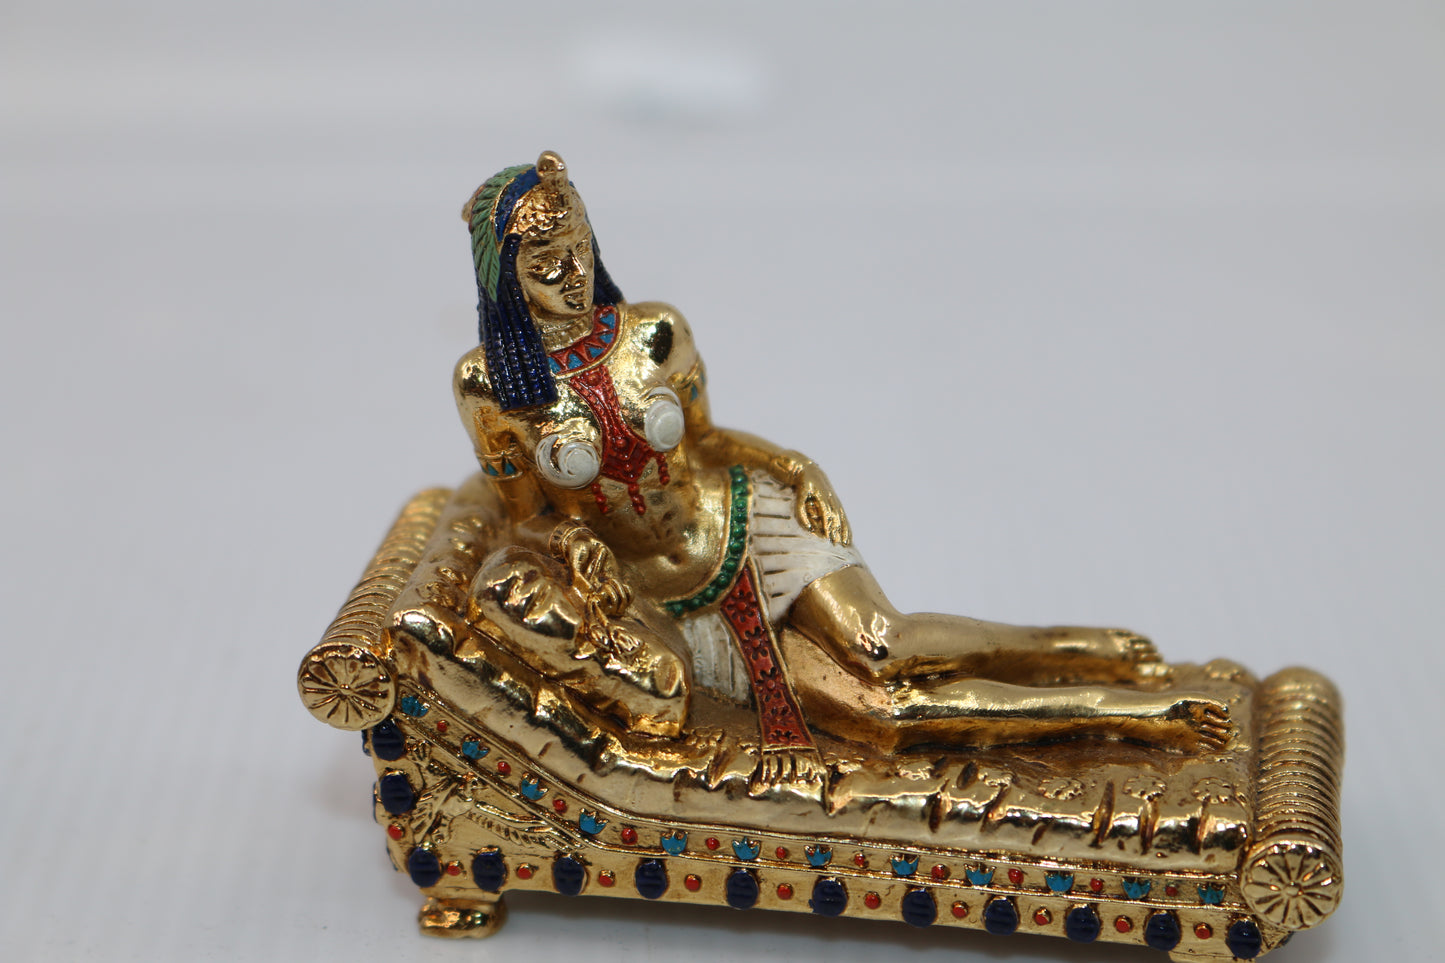 Heavy Brass Cleopatra, Queen of Egypt Statue Made In Egypt zemeno